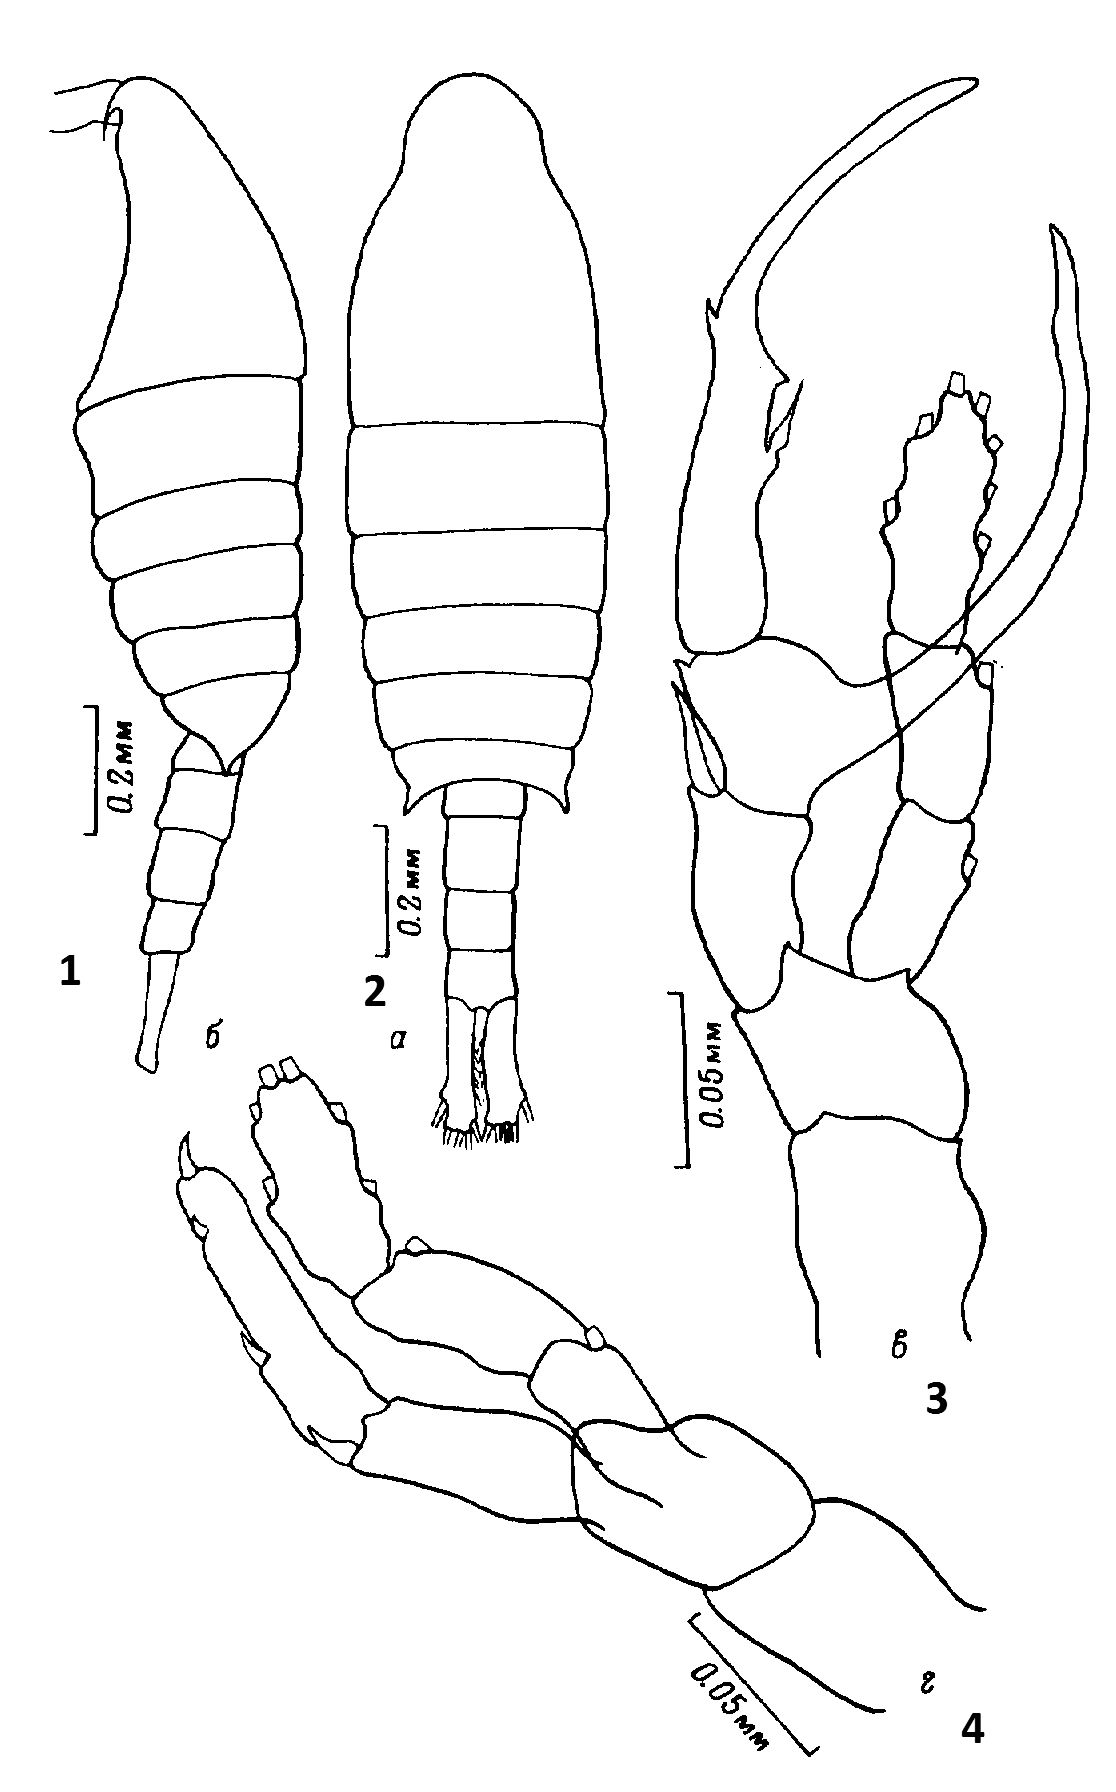 Species Centropages abdominalis - Plate 10 of morphological figures